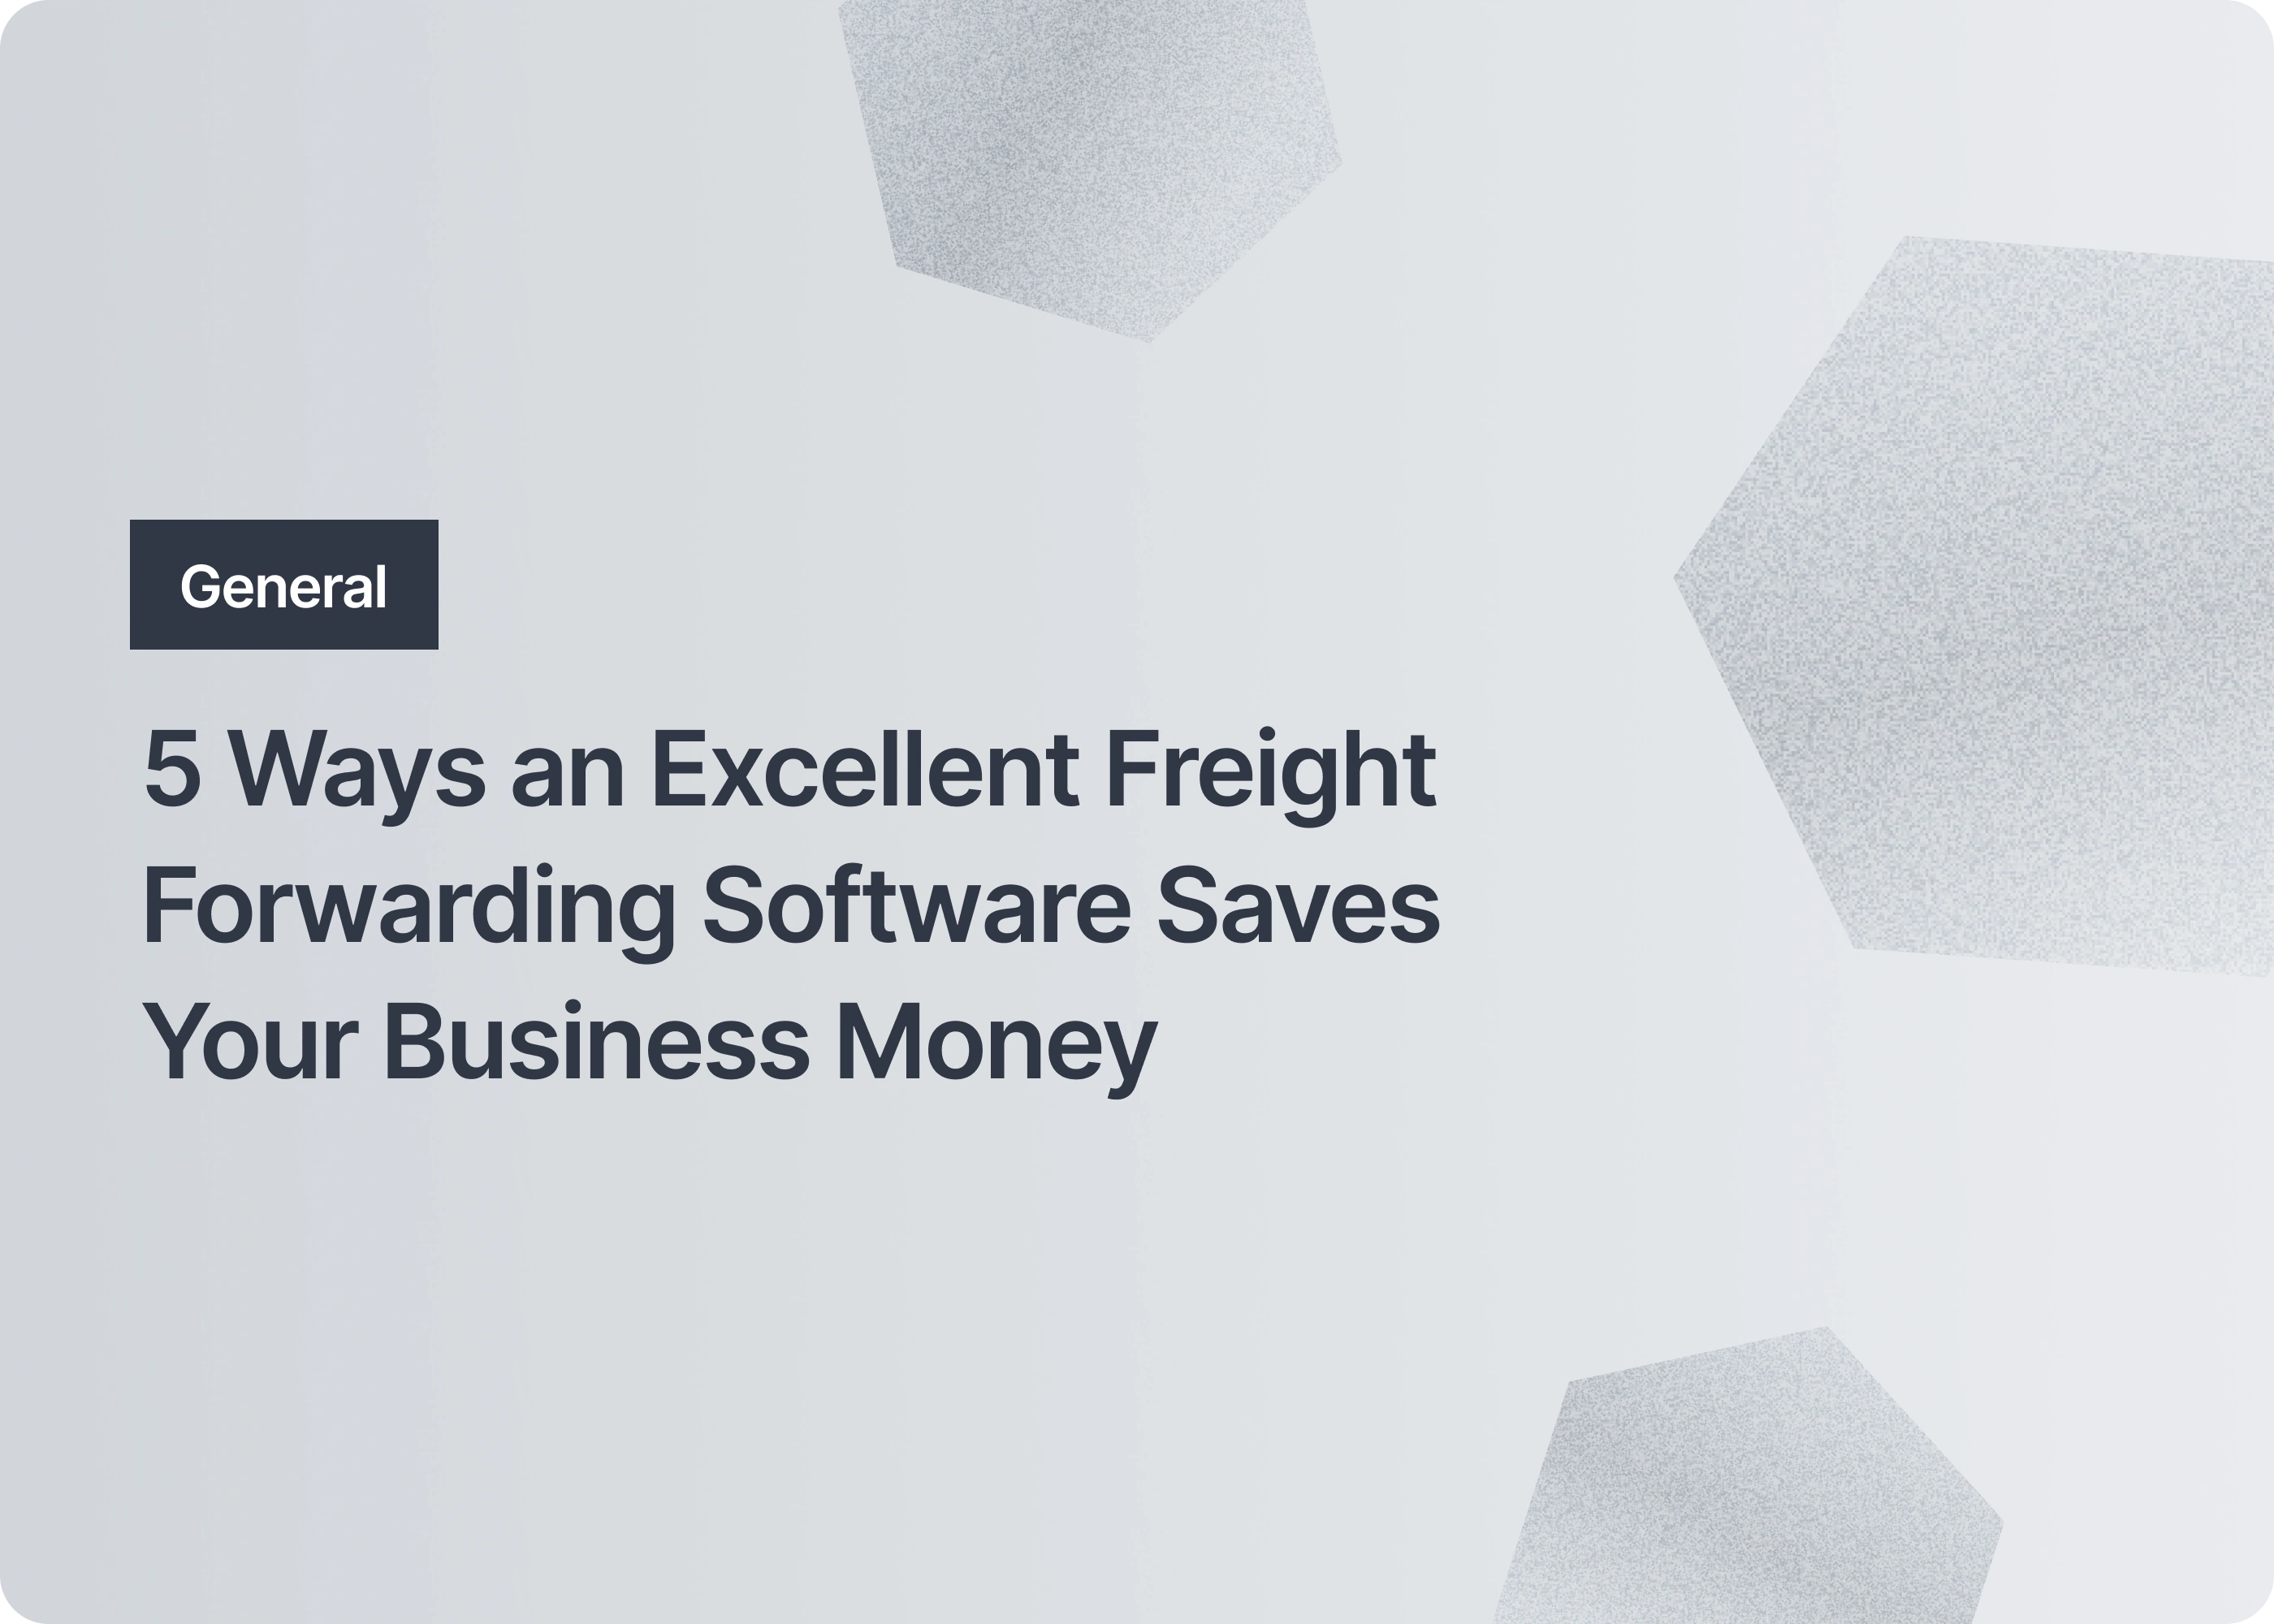 5 Ways an Excellent Freight Forwarding Software Saves Your Business Money